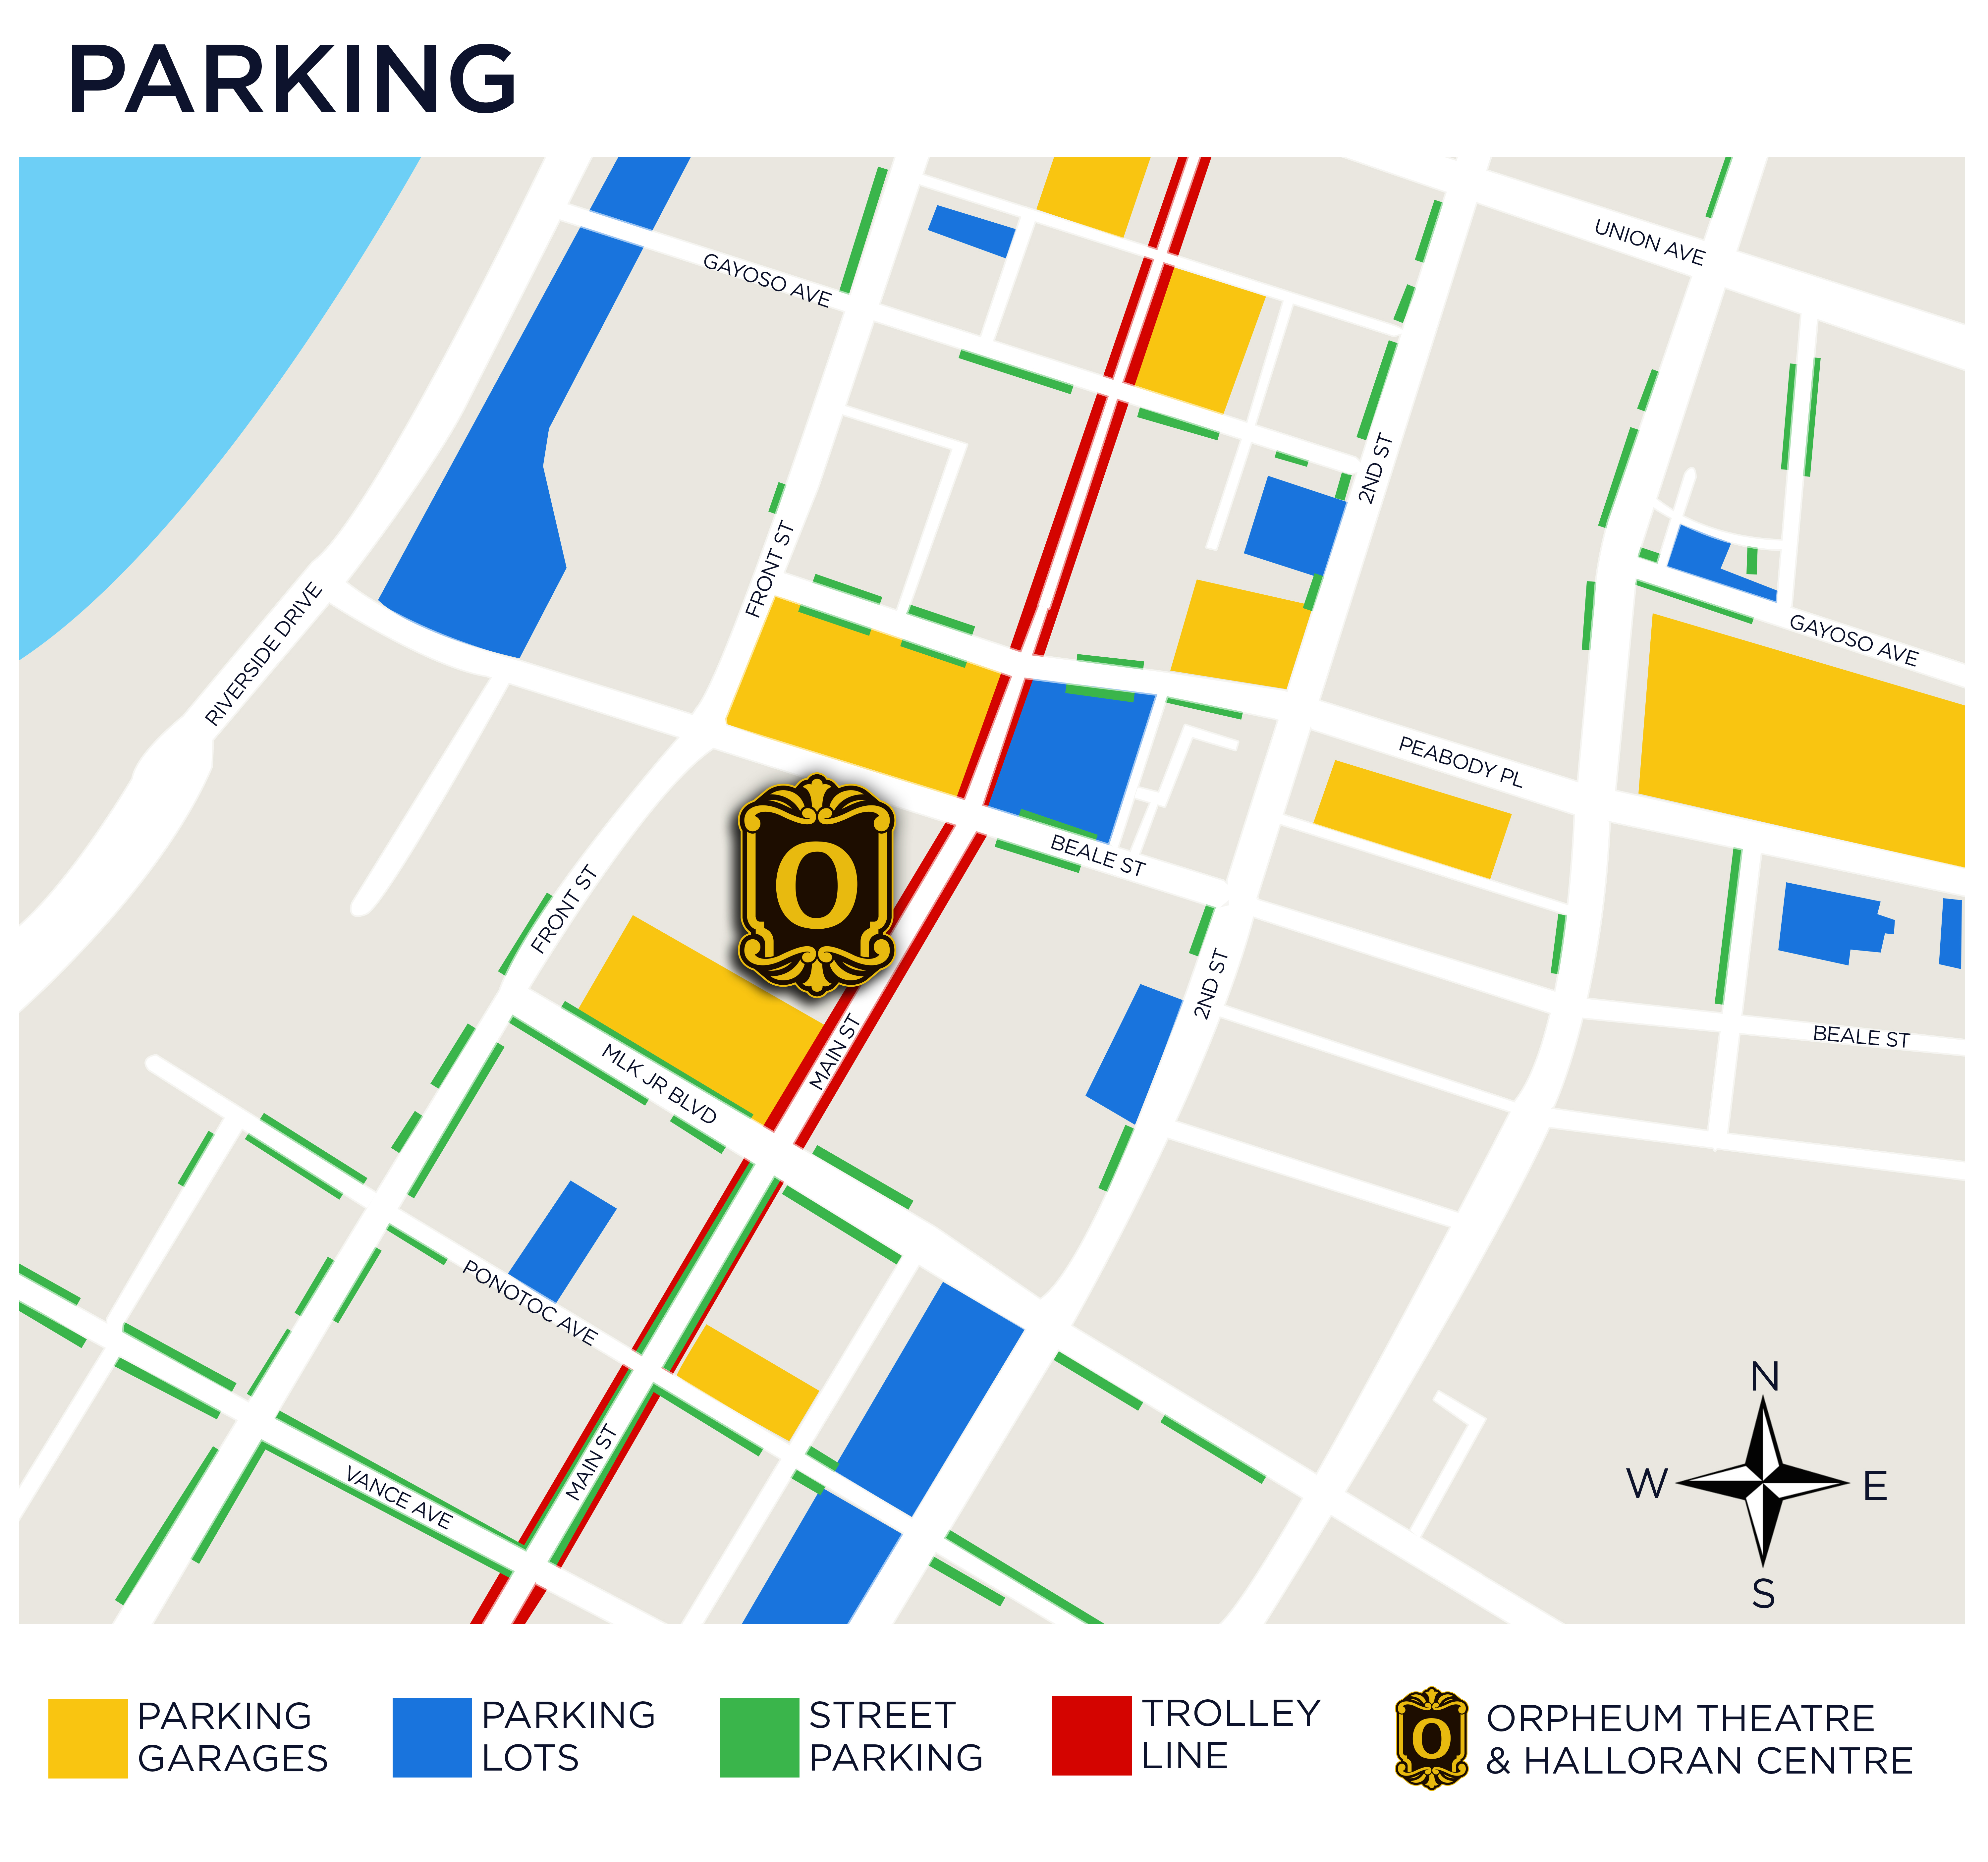 Map highlighting the best parking spots near the Orpheum Theatre and Halloran Centre